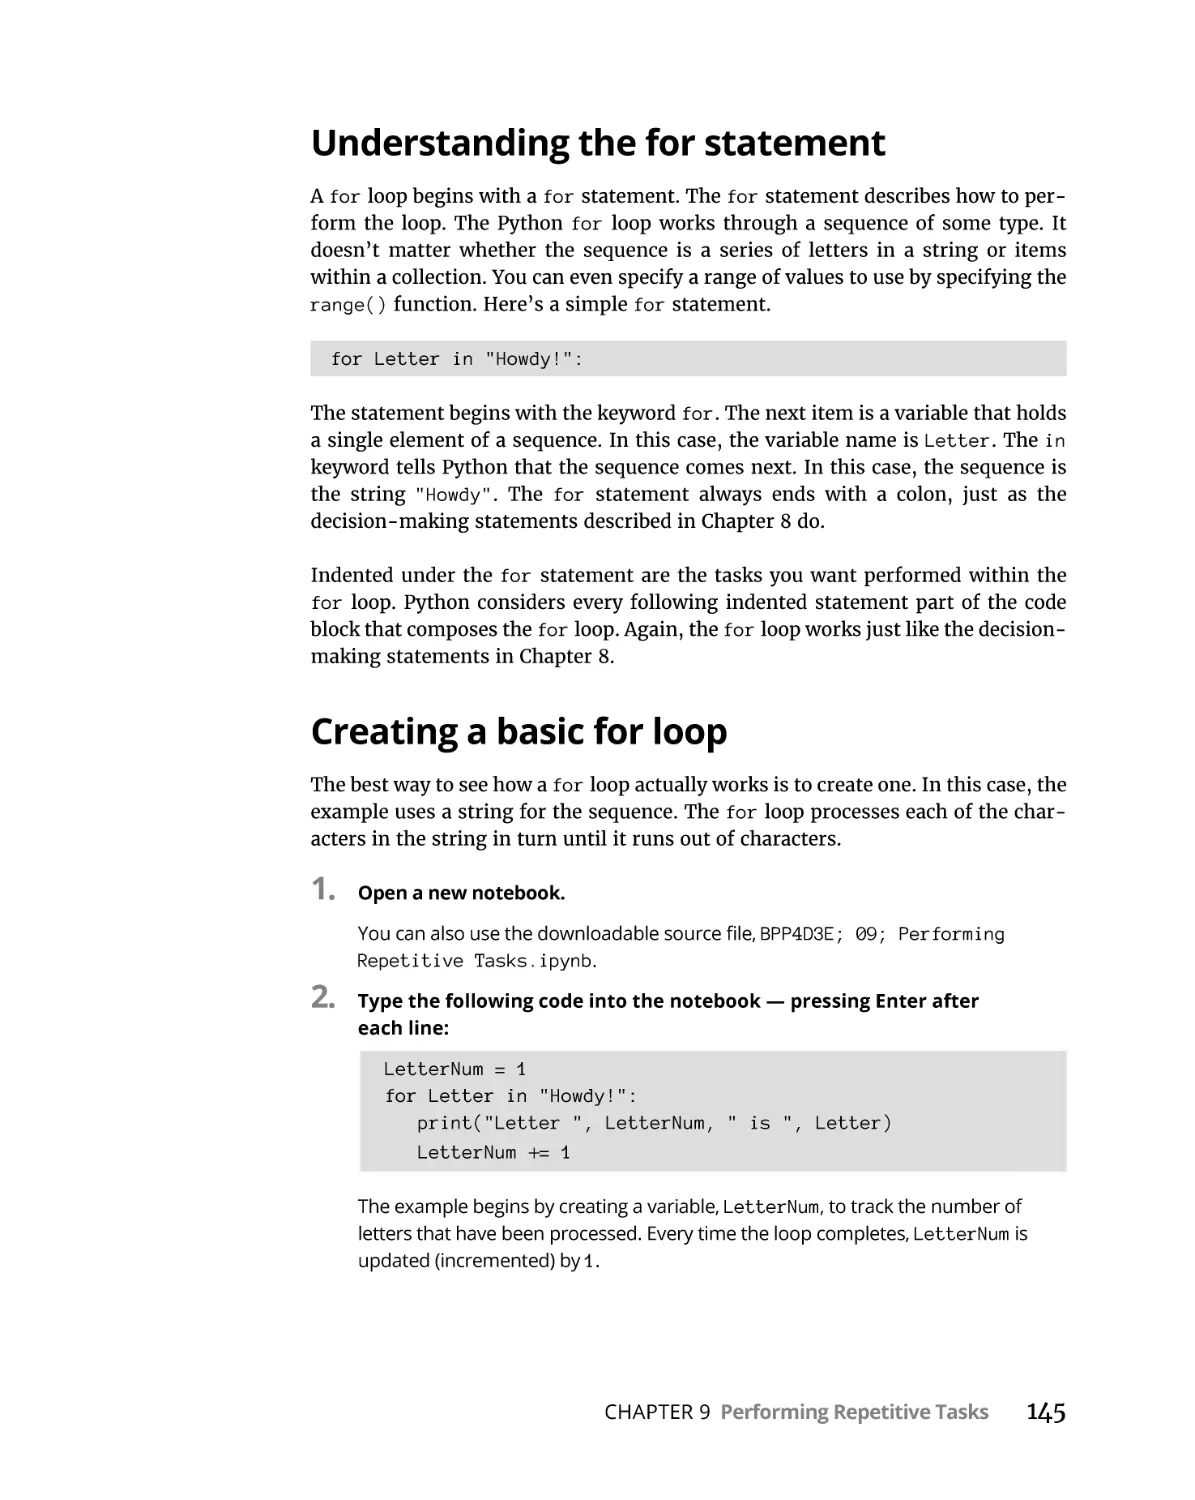 Understanding the for statement
Creating a basic for loop